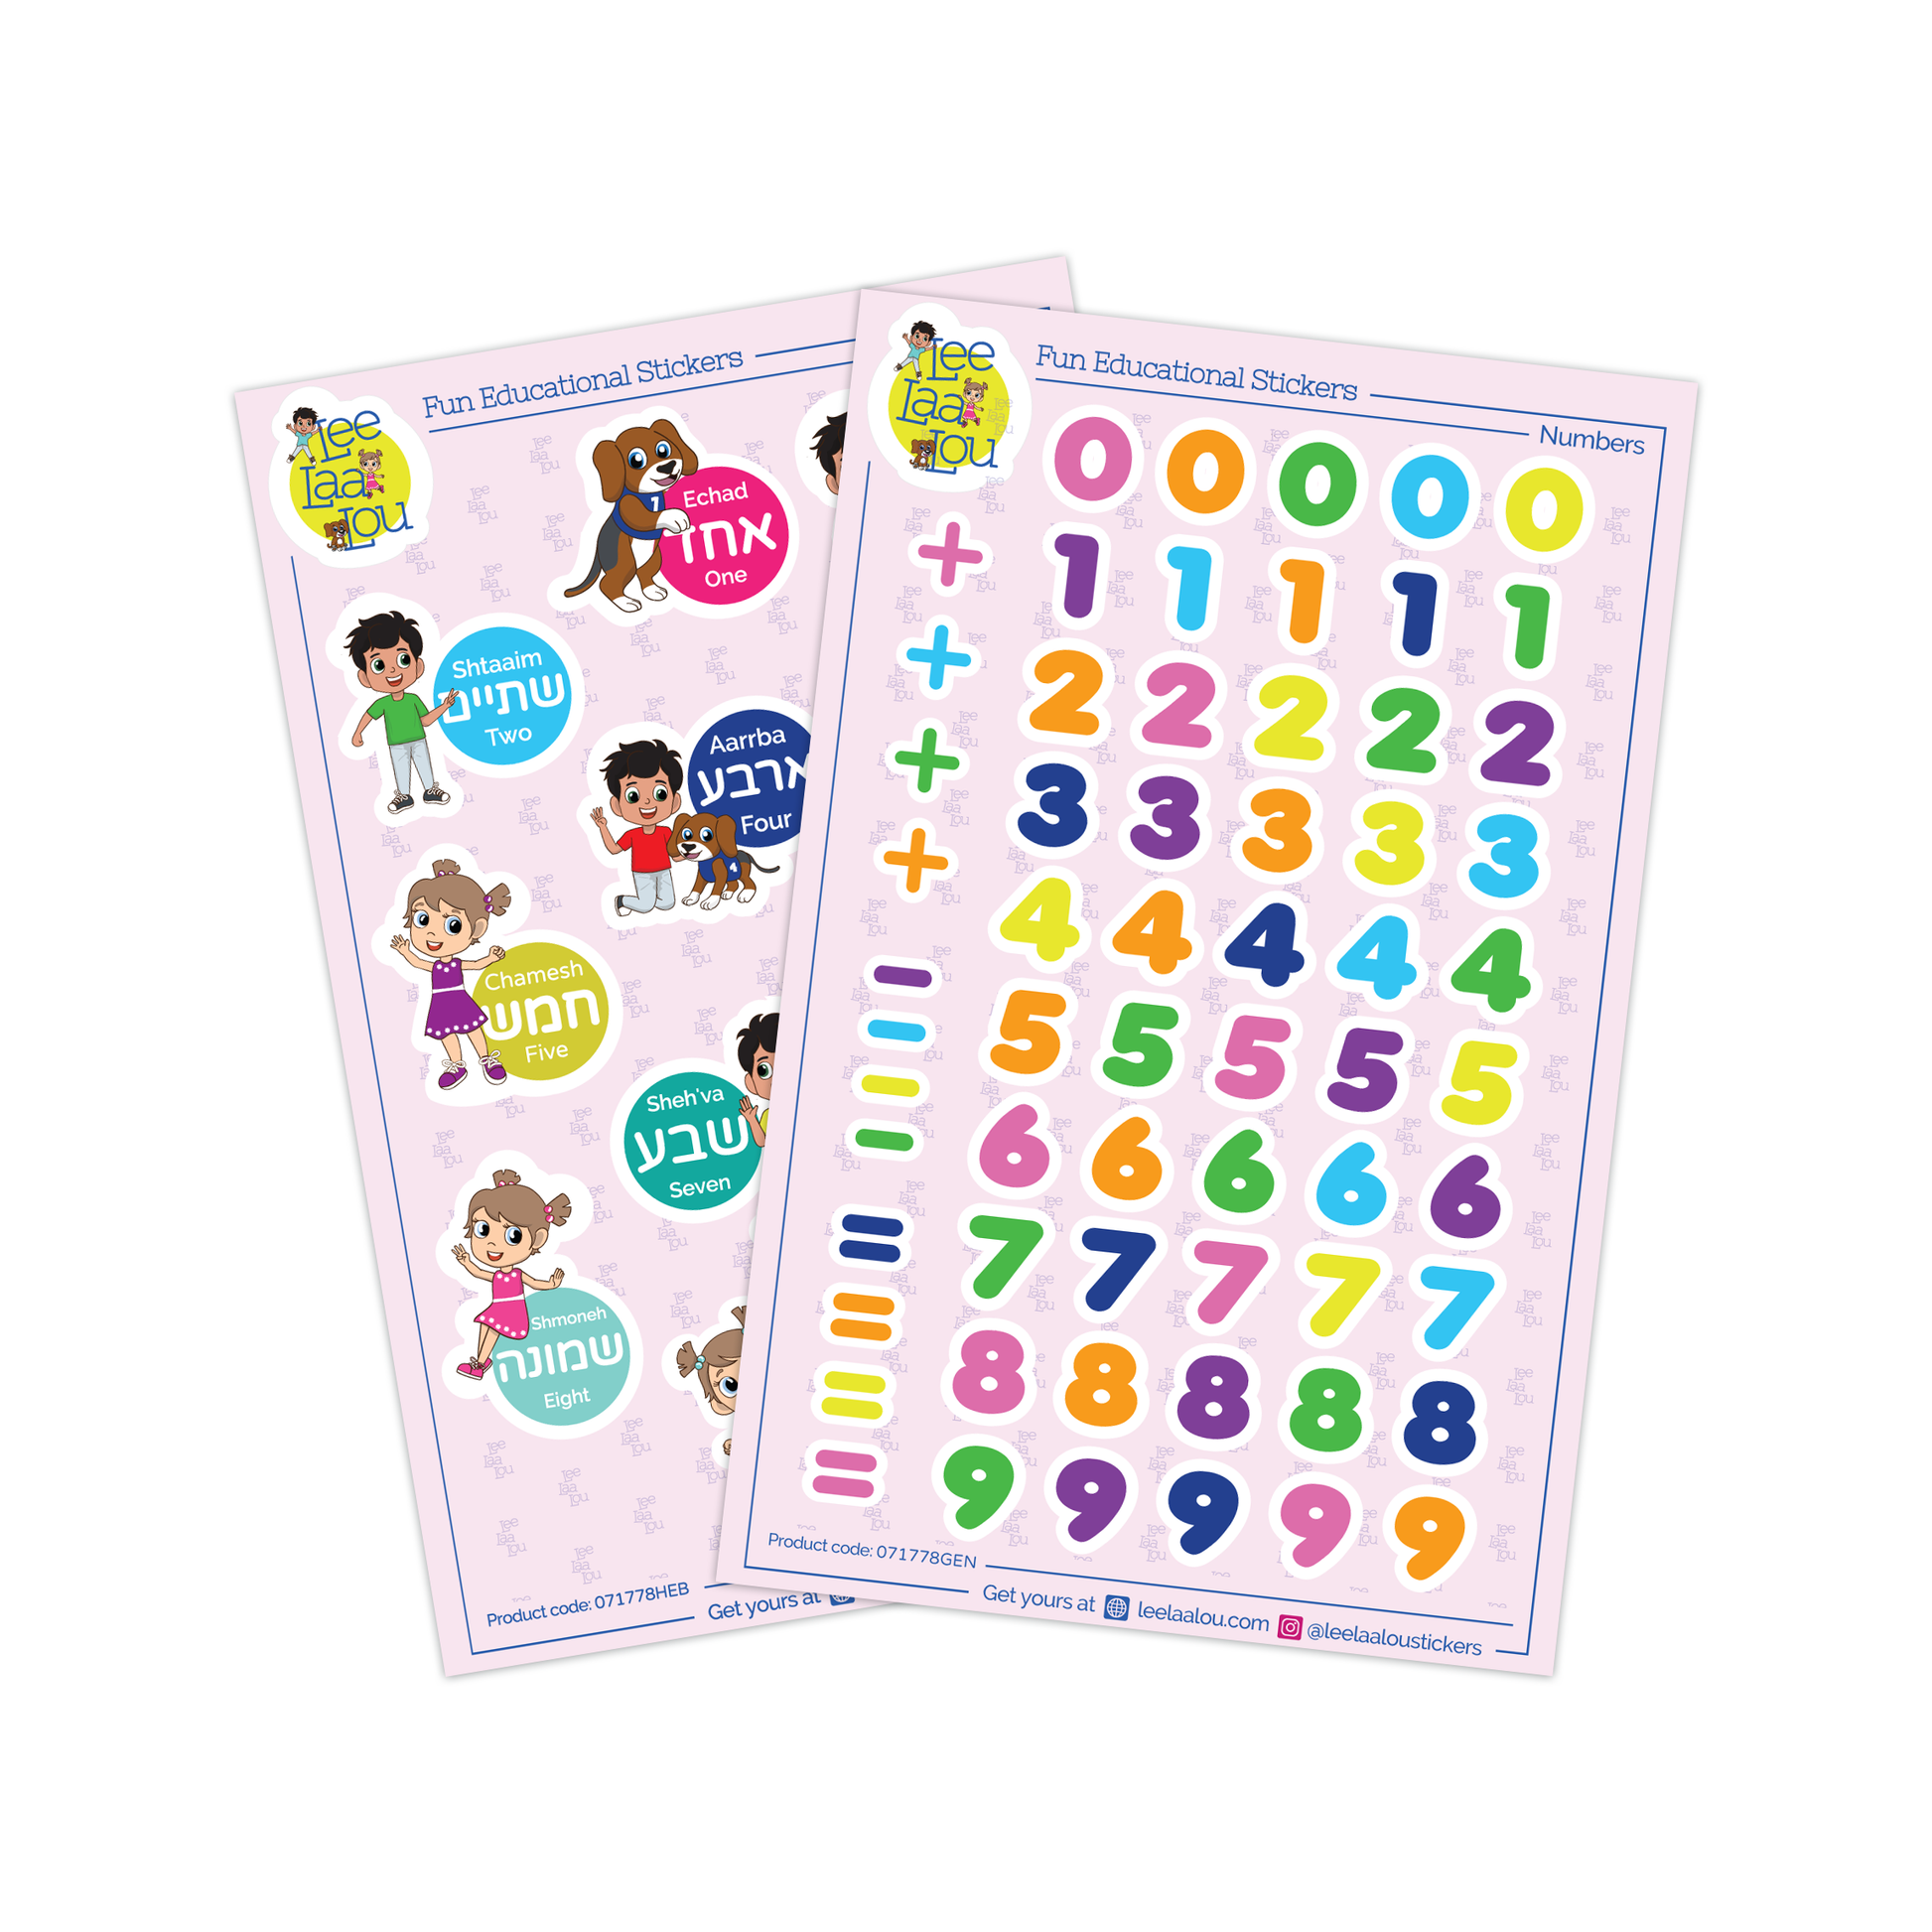 Sticker sheets of numbers in Hebrew with English translation. Stickers of the numbers 0-9 with math signs.